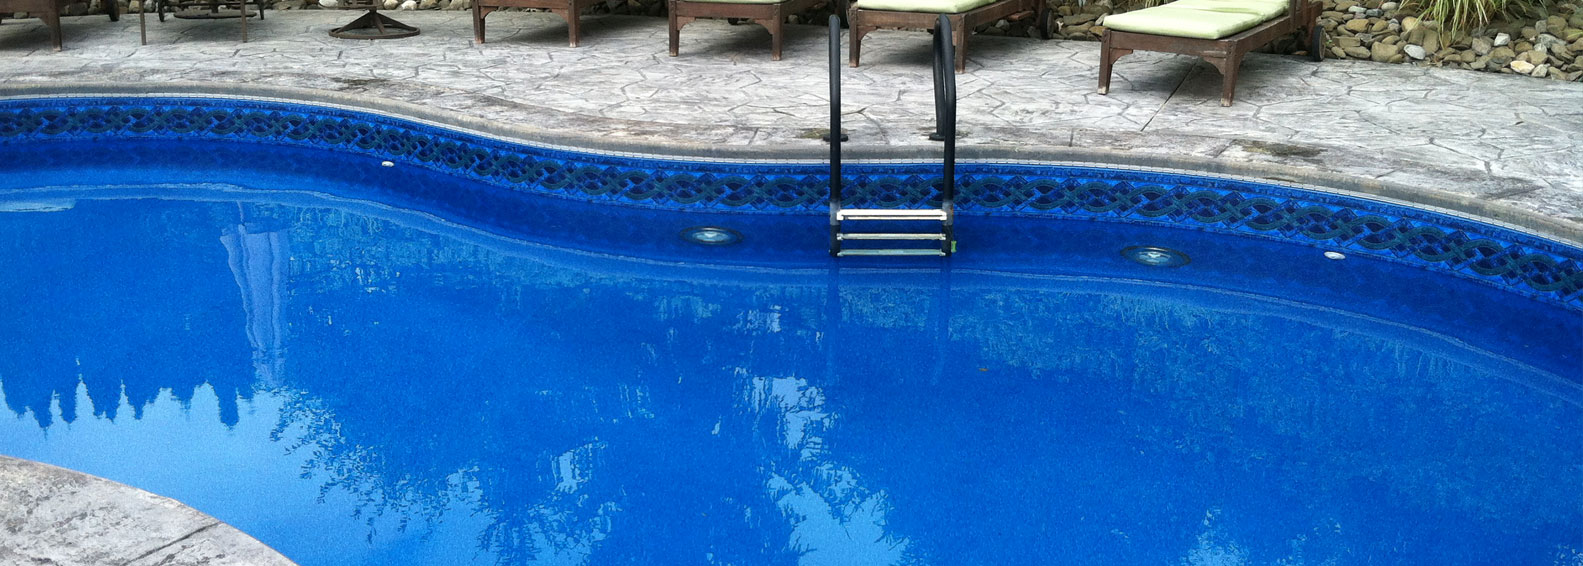 The 10 Best Swimming Pool Repair Services Near Me